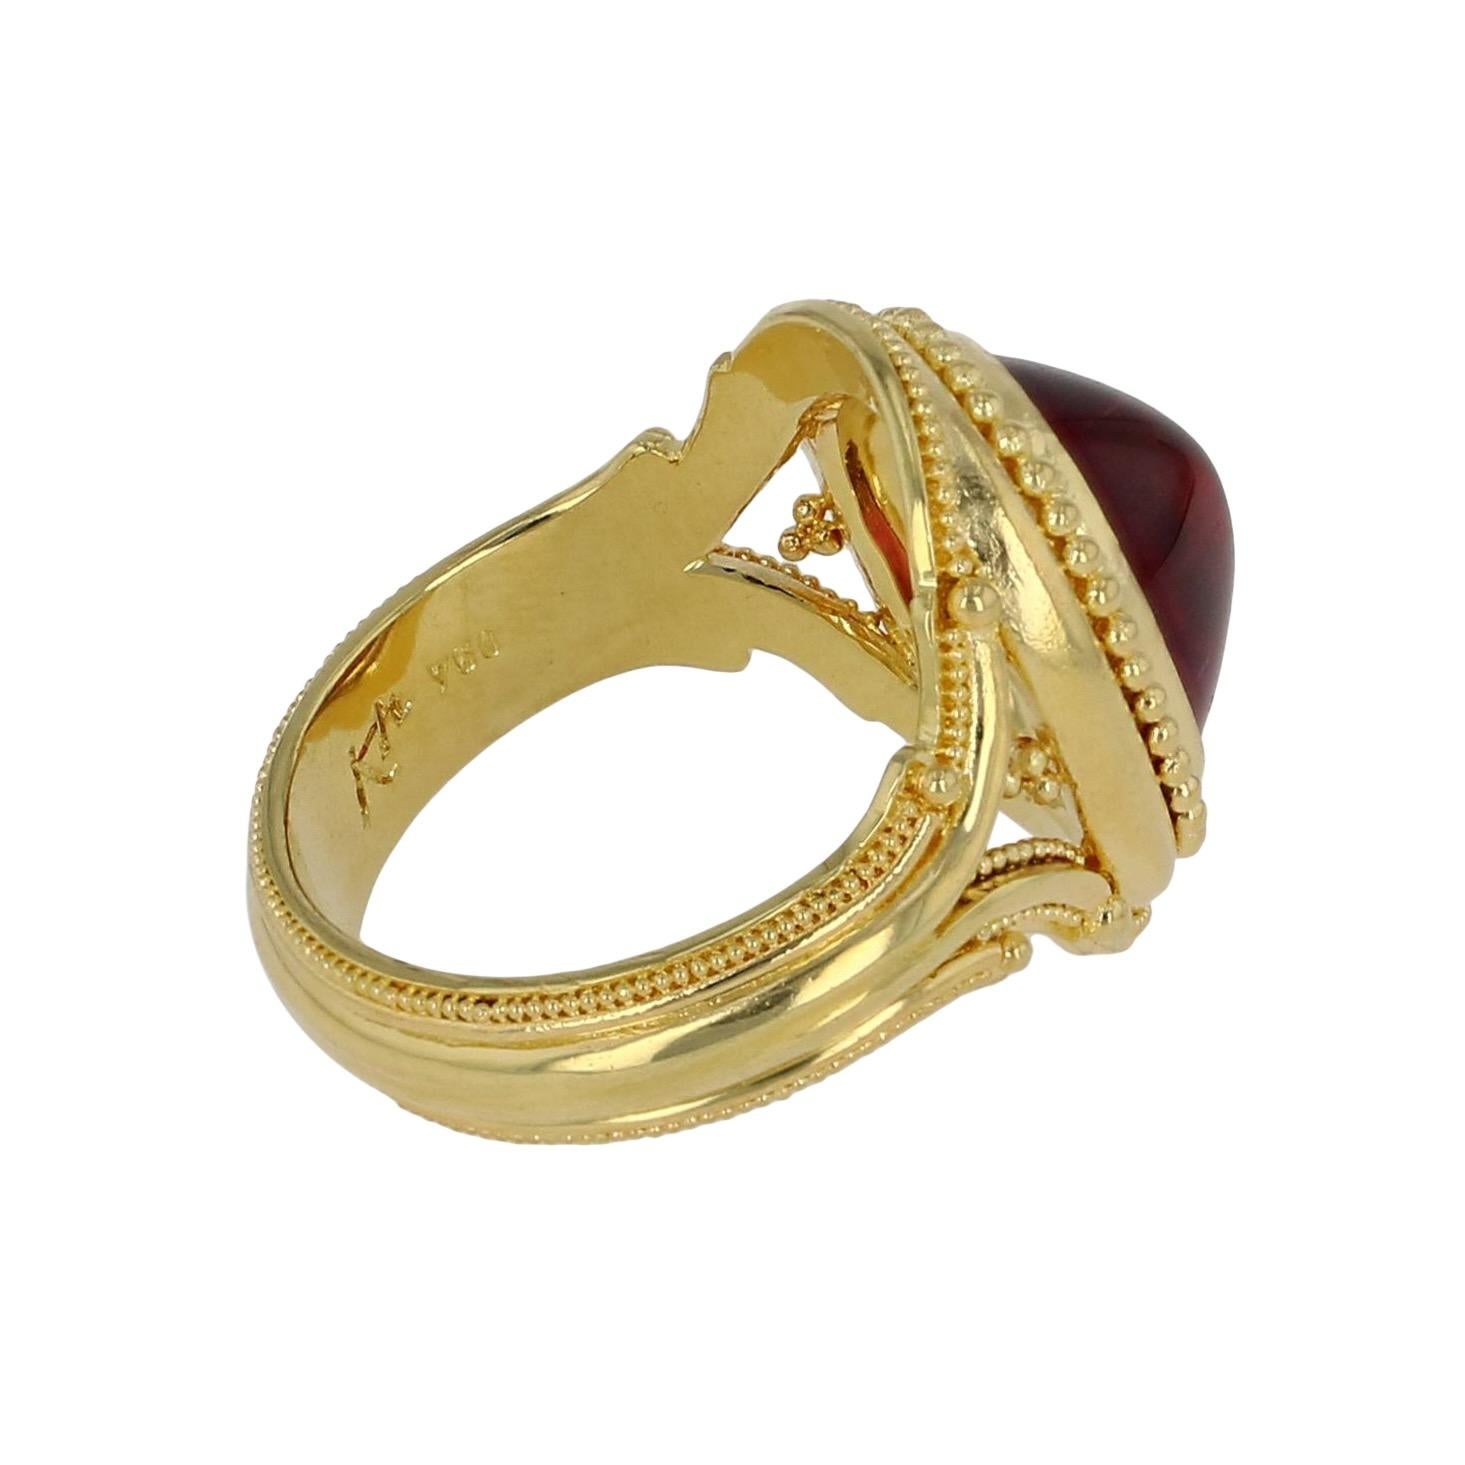 Kent Raible 18 Karat Gold Rubellite Tourmaline Cocktail Ring with Granulation In New Condition For Sale In Mossrock, WA